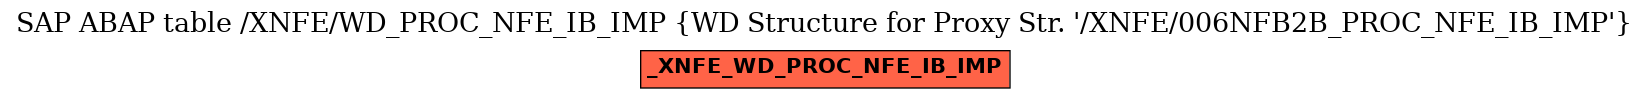 E-R Diagram for table /XNFE/WD_PROC_NFE_IB_IMP (WD Structure for Proxy Str. 